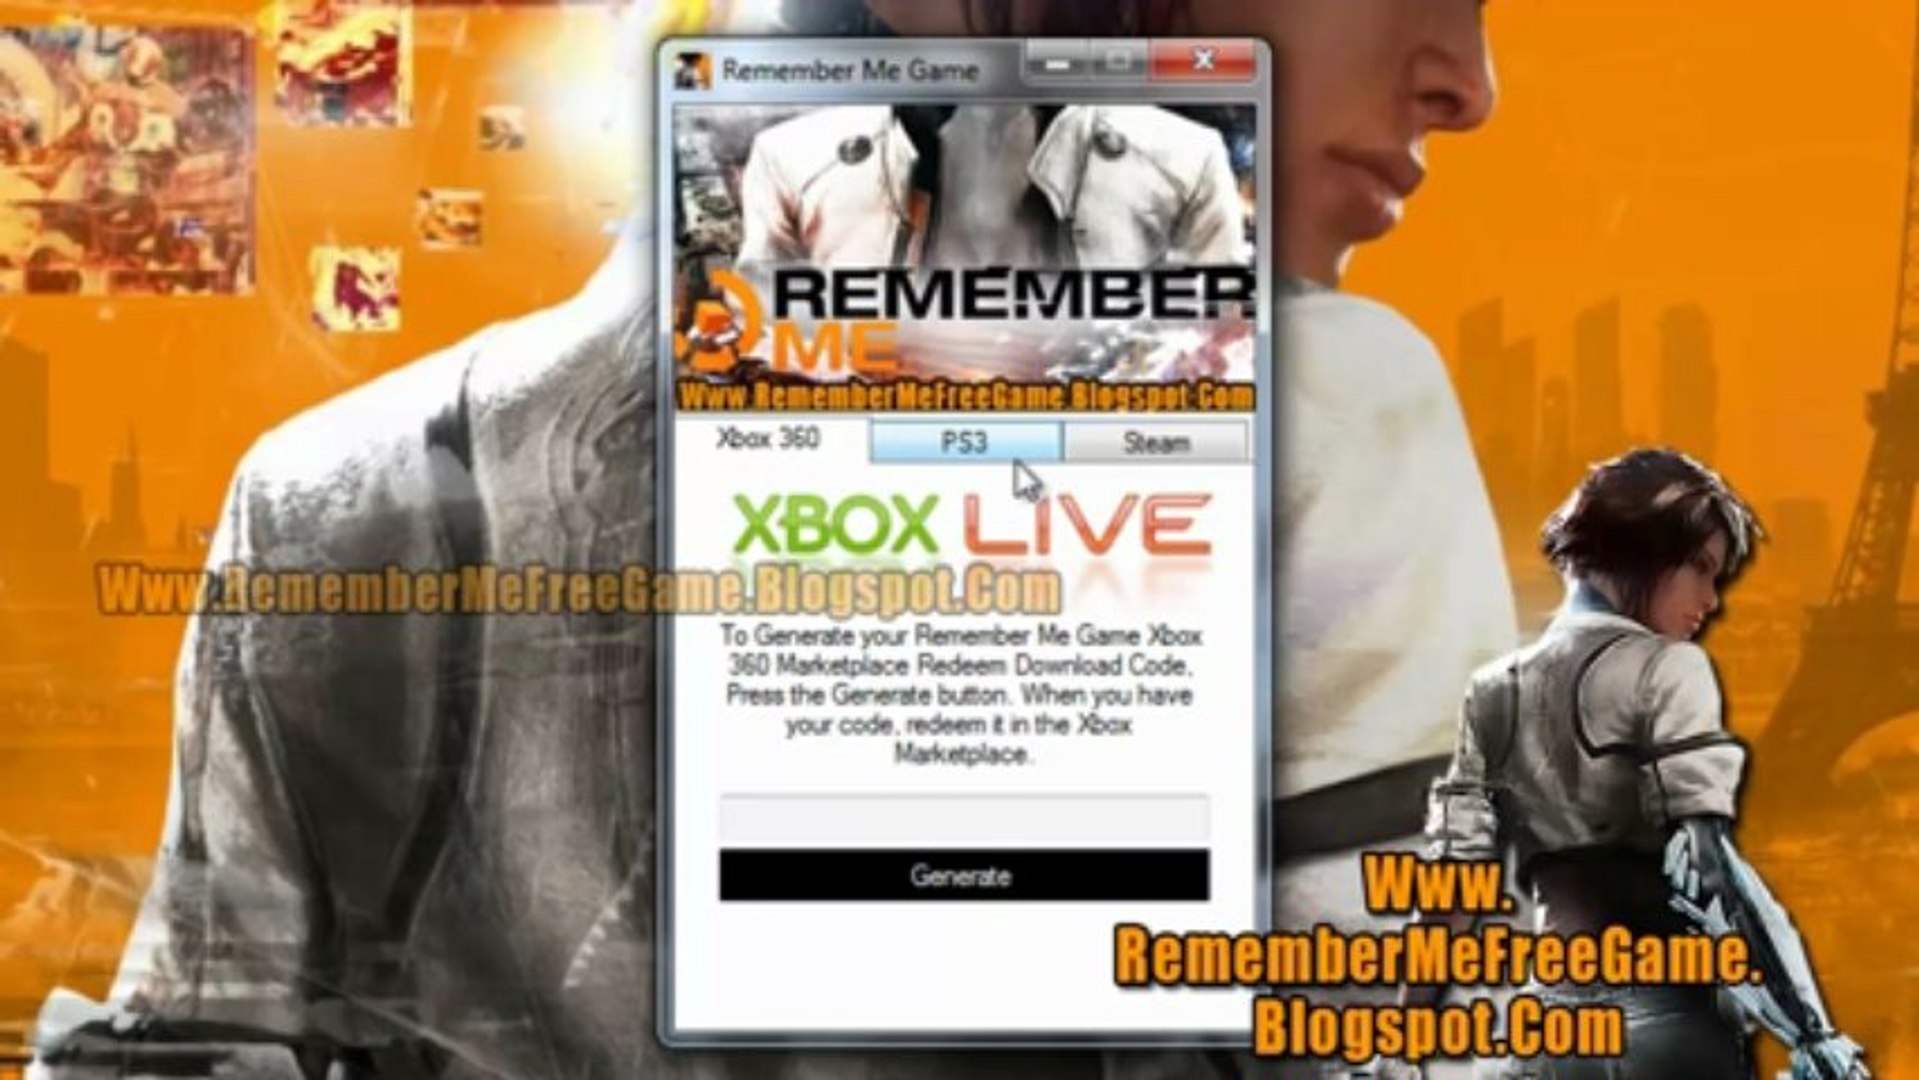 Download DLC Code Free For Remember Me Game - video Dailymotion